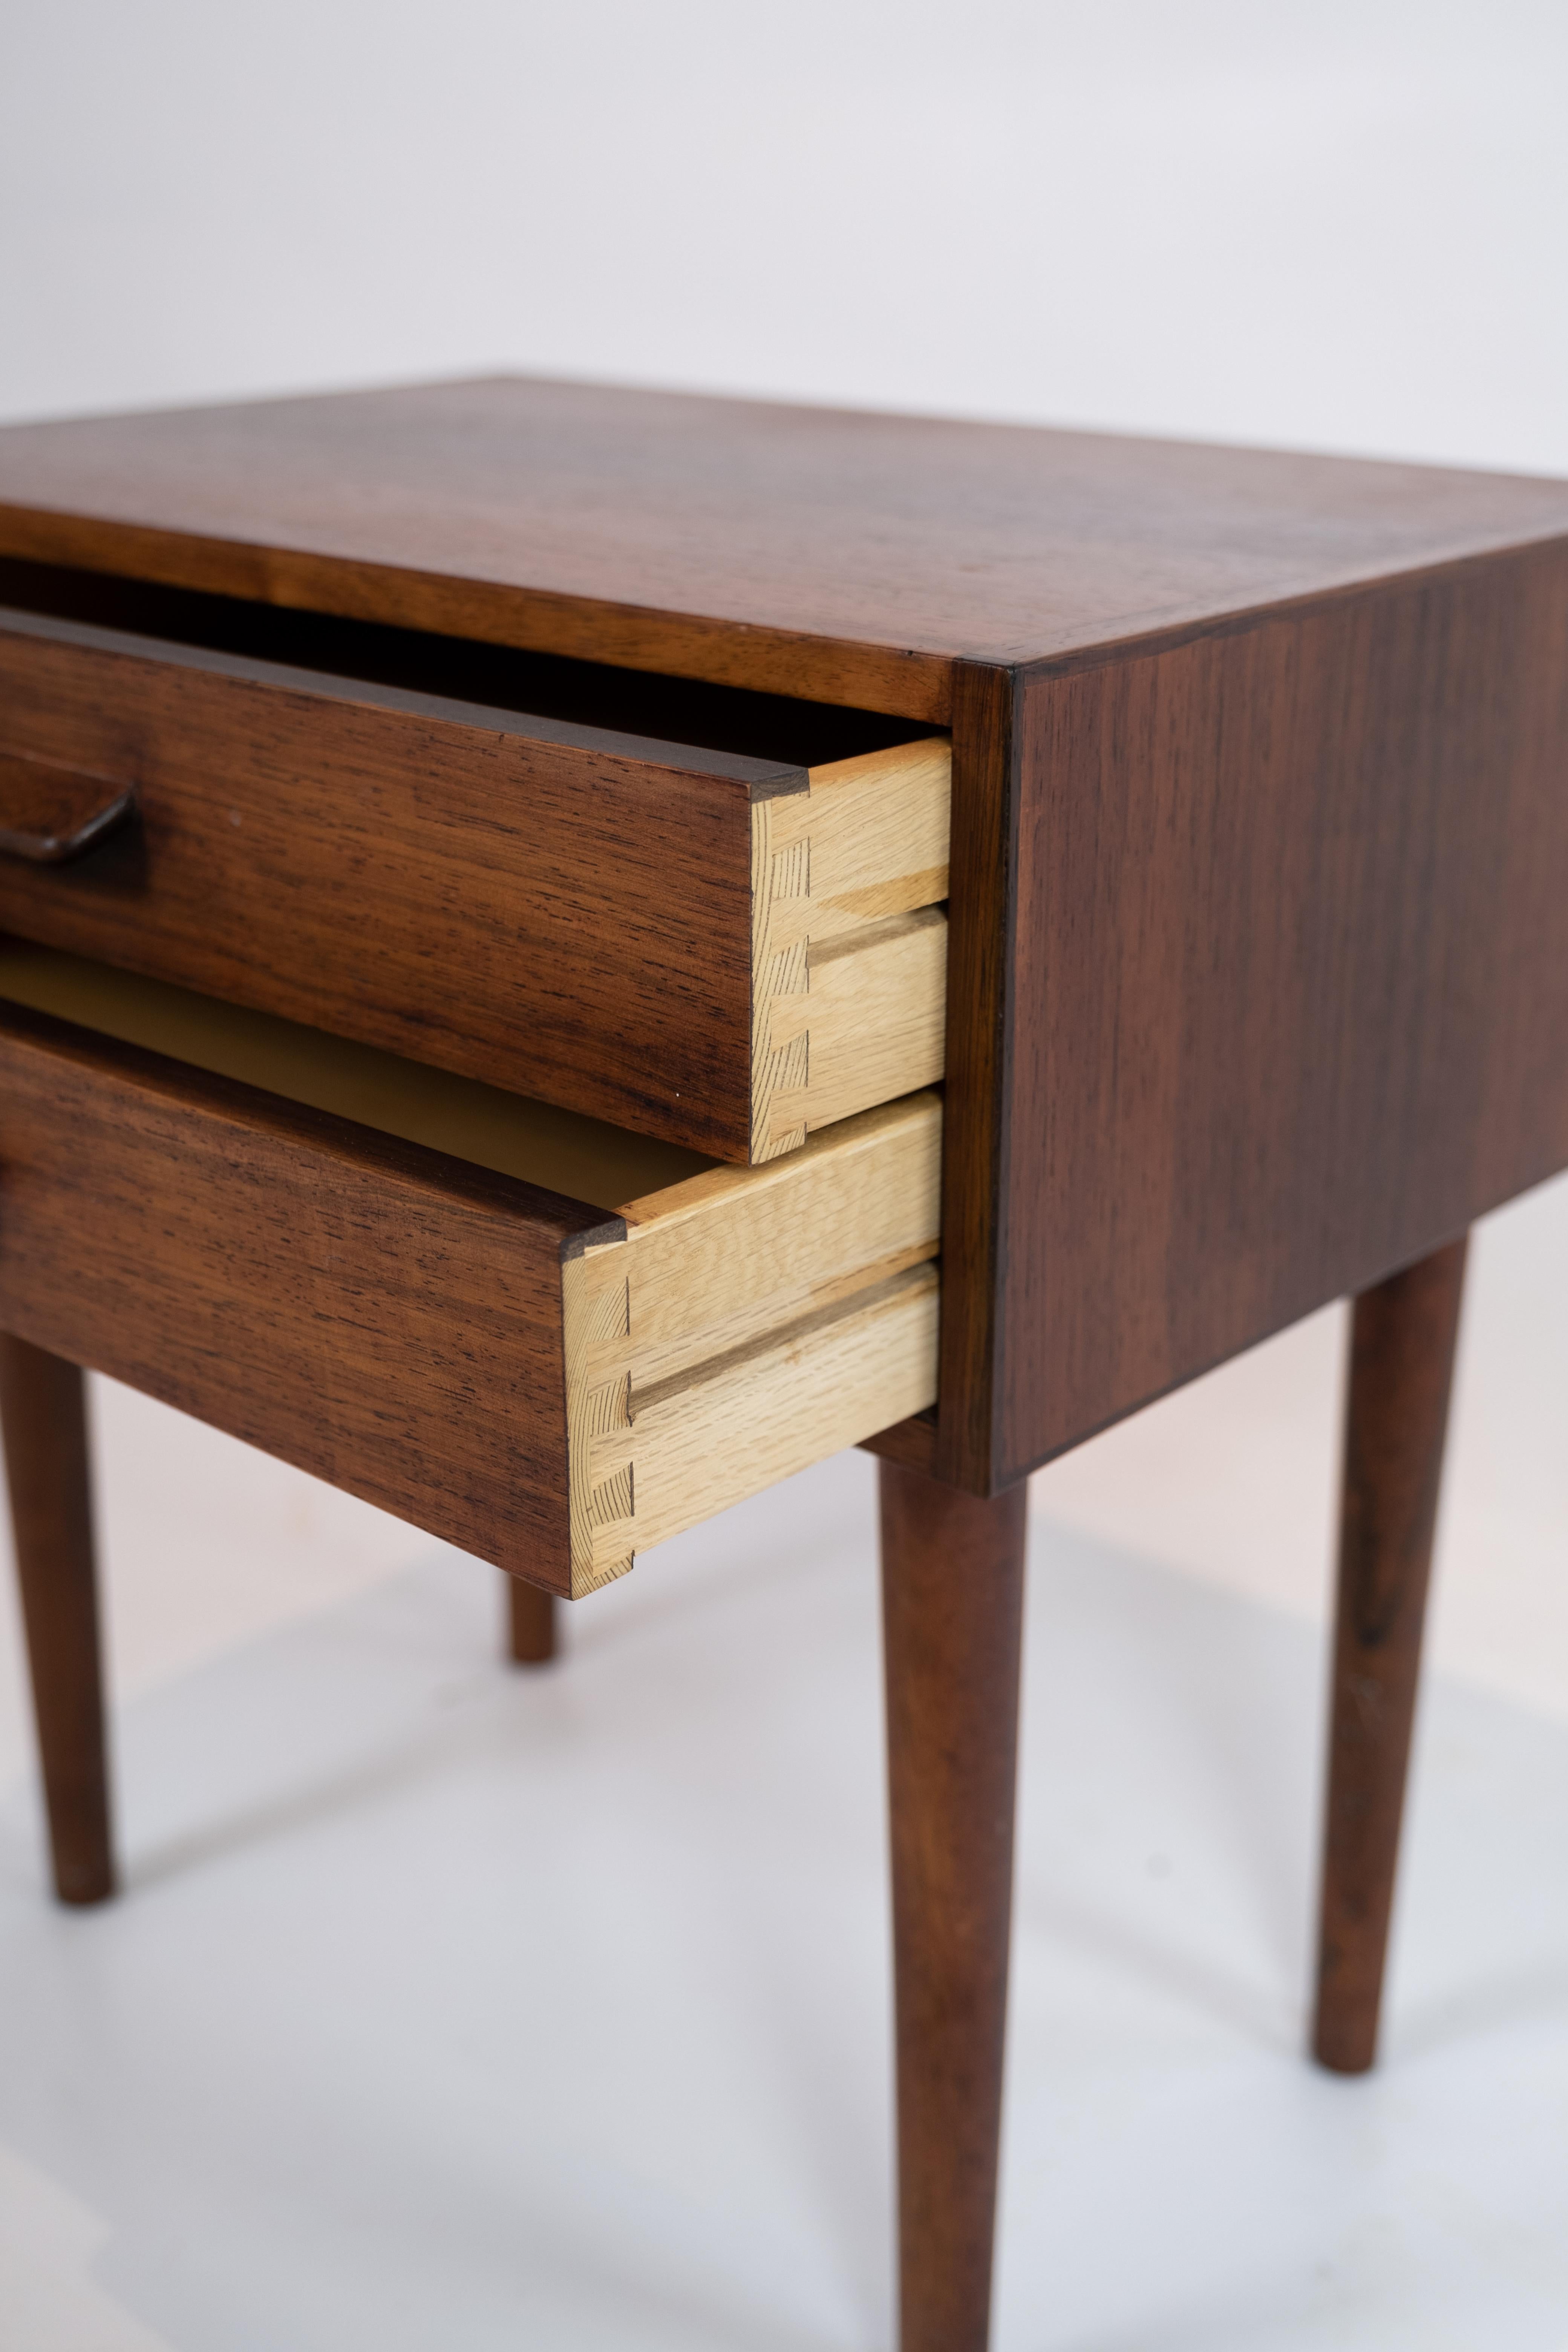 Rosewood Chest of Drawers in Teak of Danish Design from the 1960s